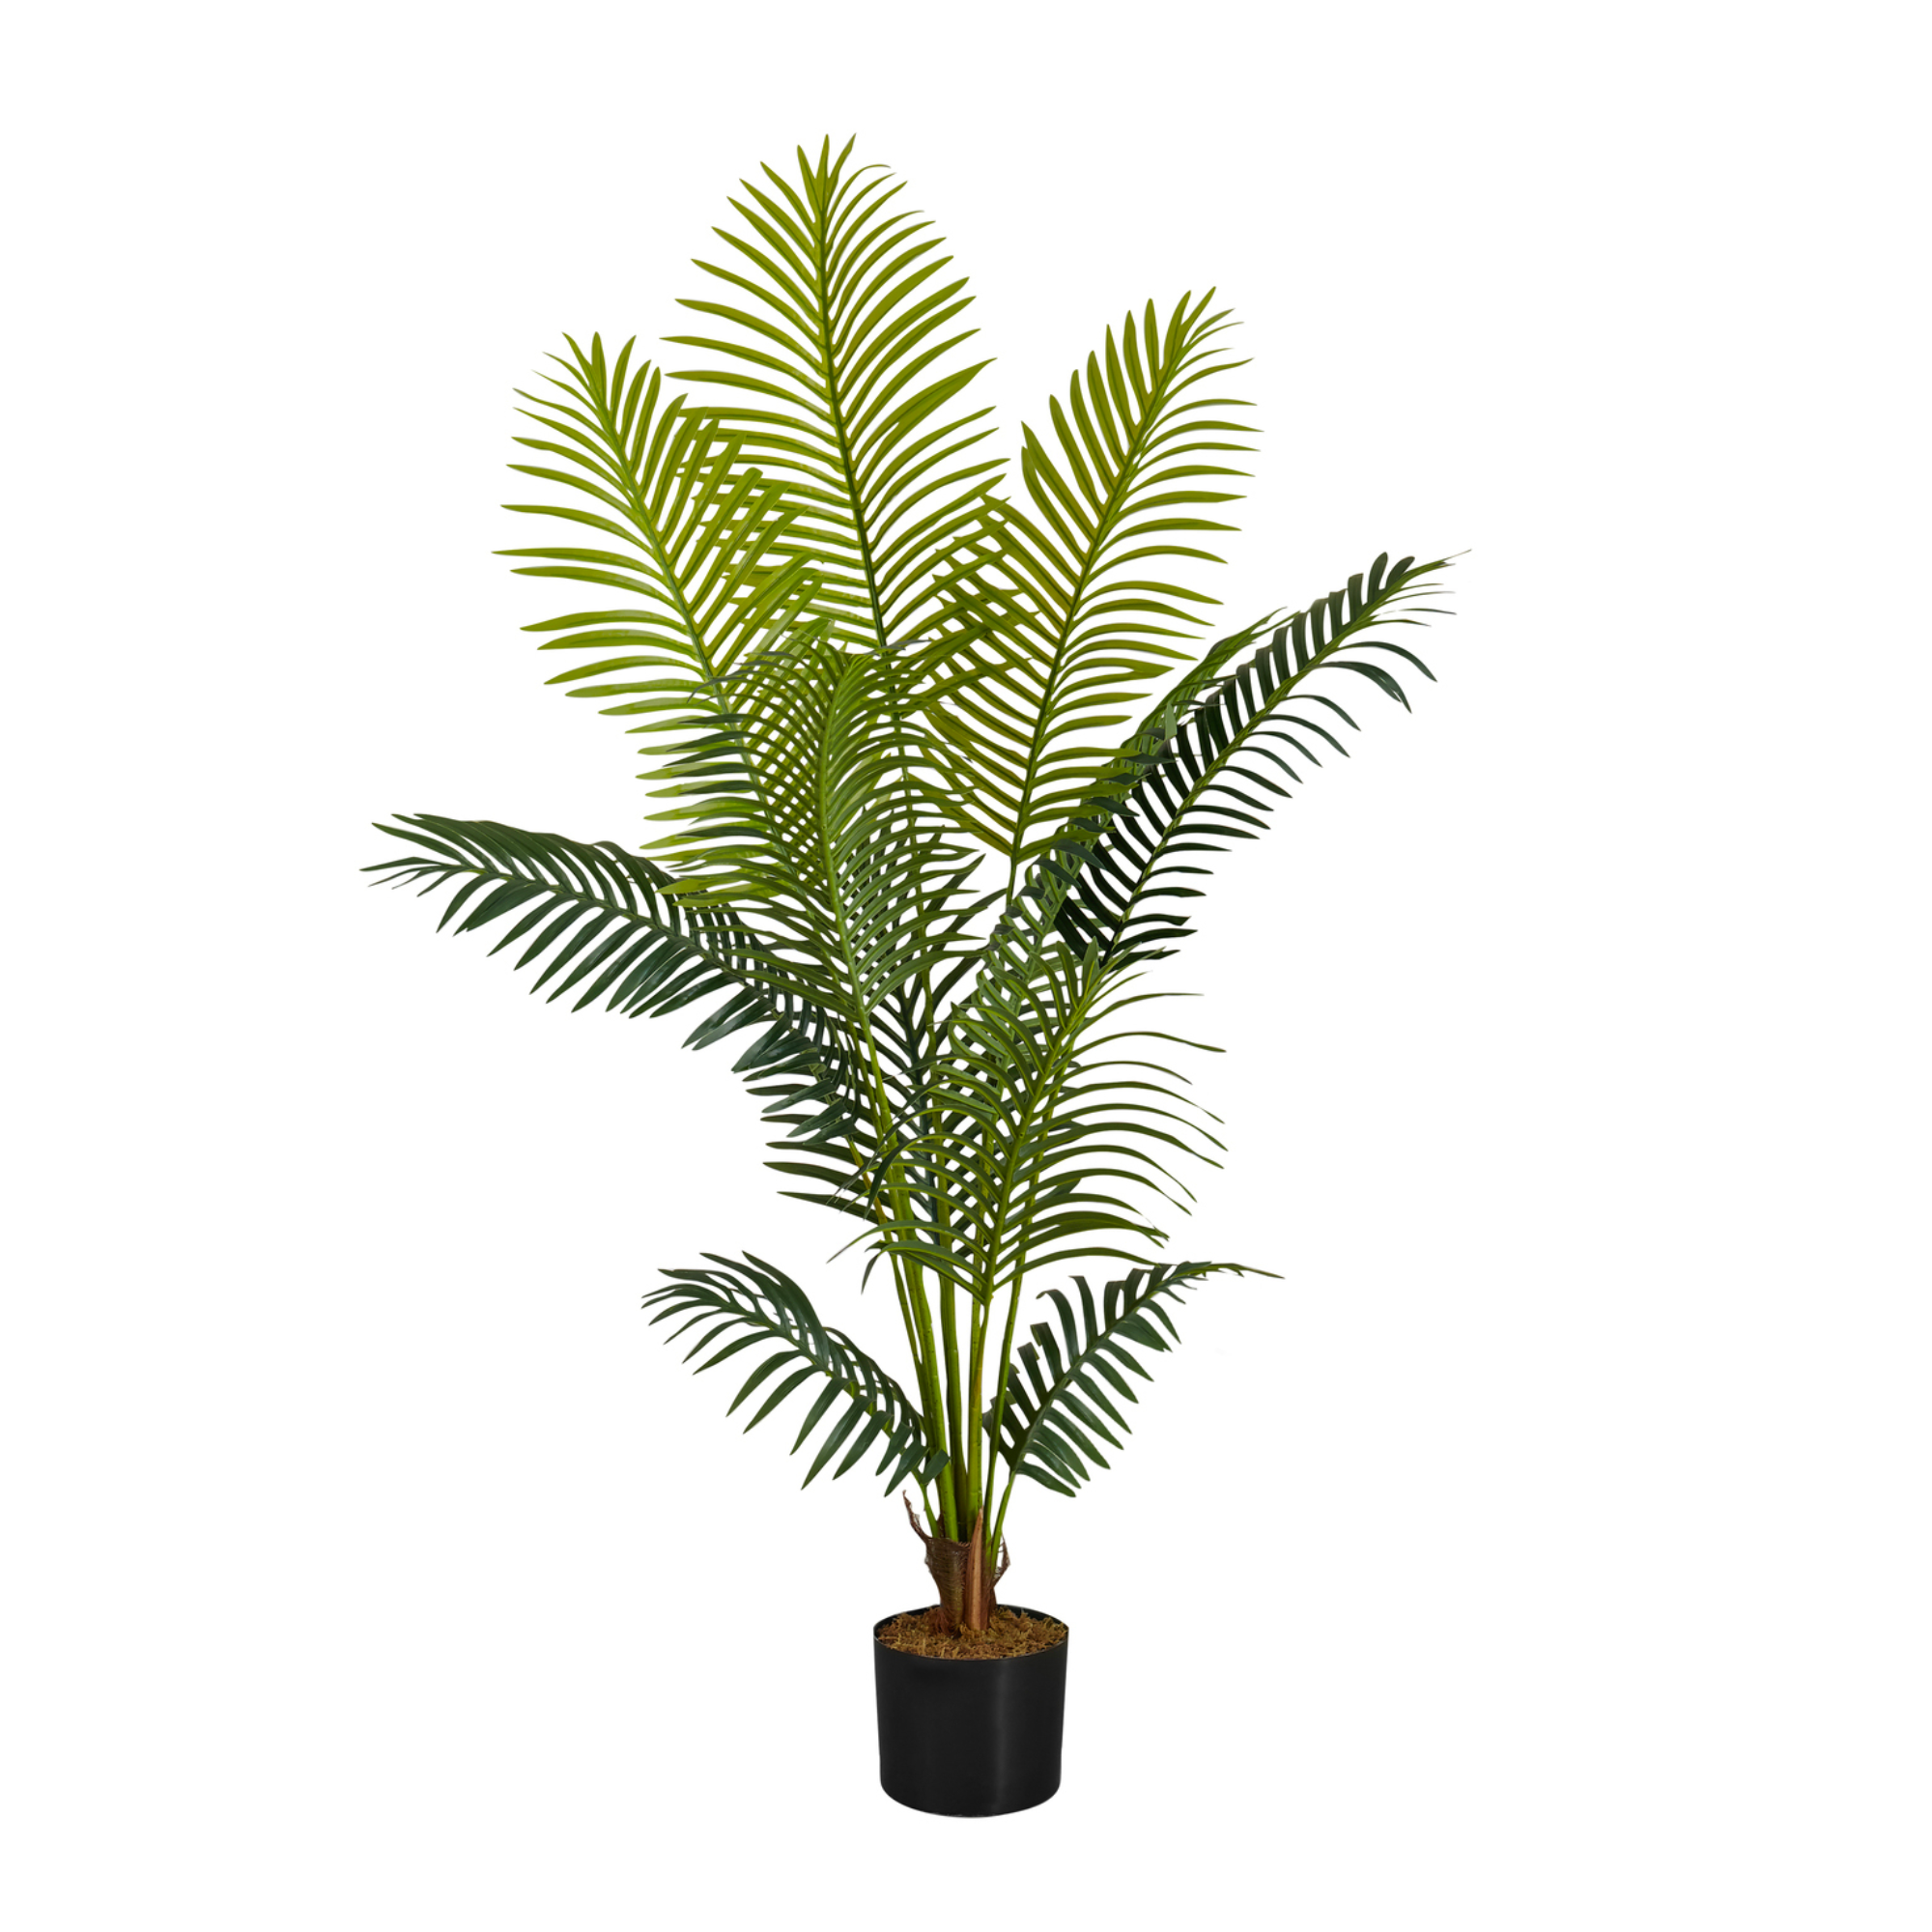 ARTIFICIAL PLANT - 47"H / INDOOR PALM TREE IN A 5" POT